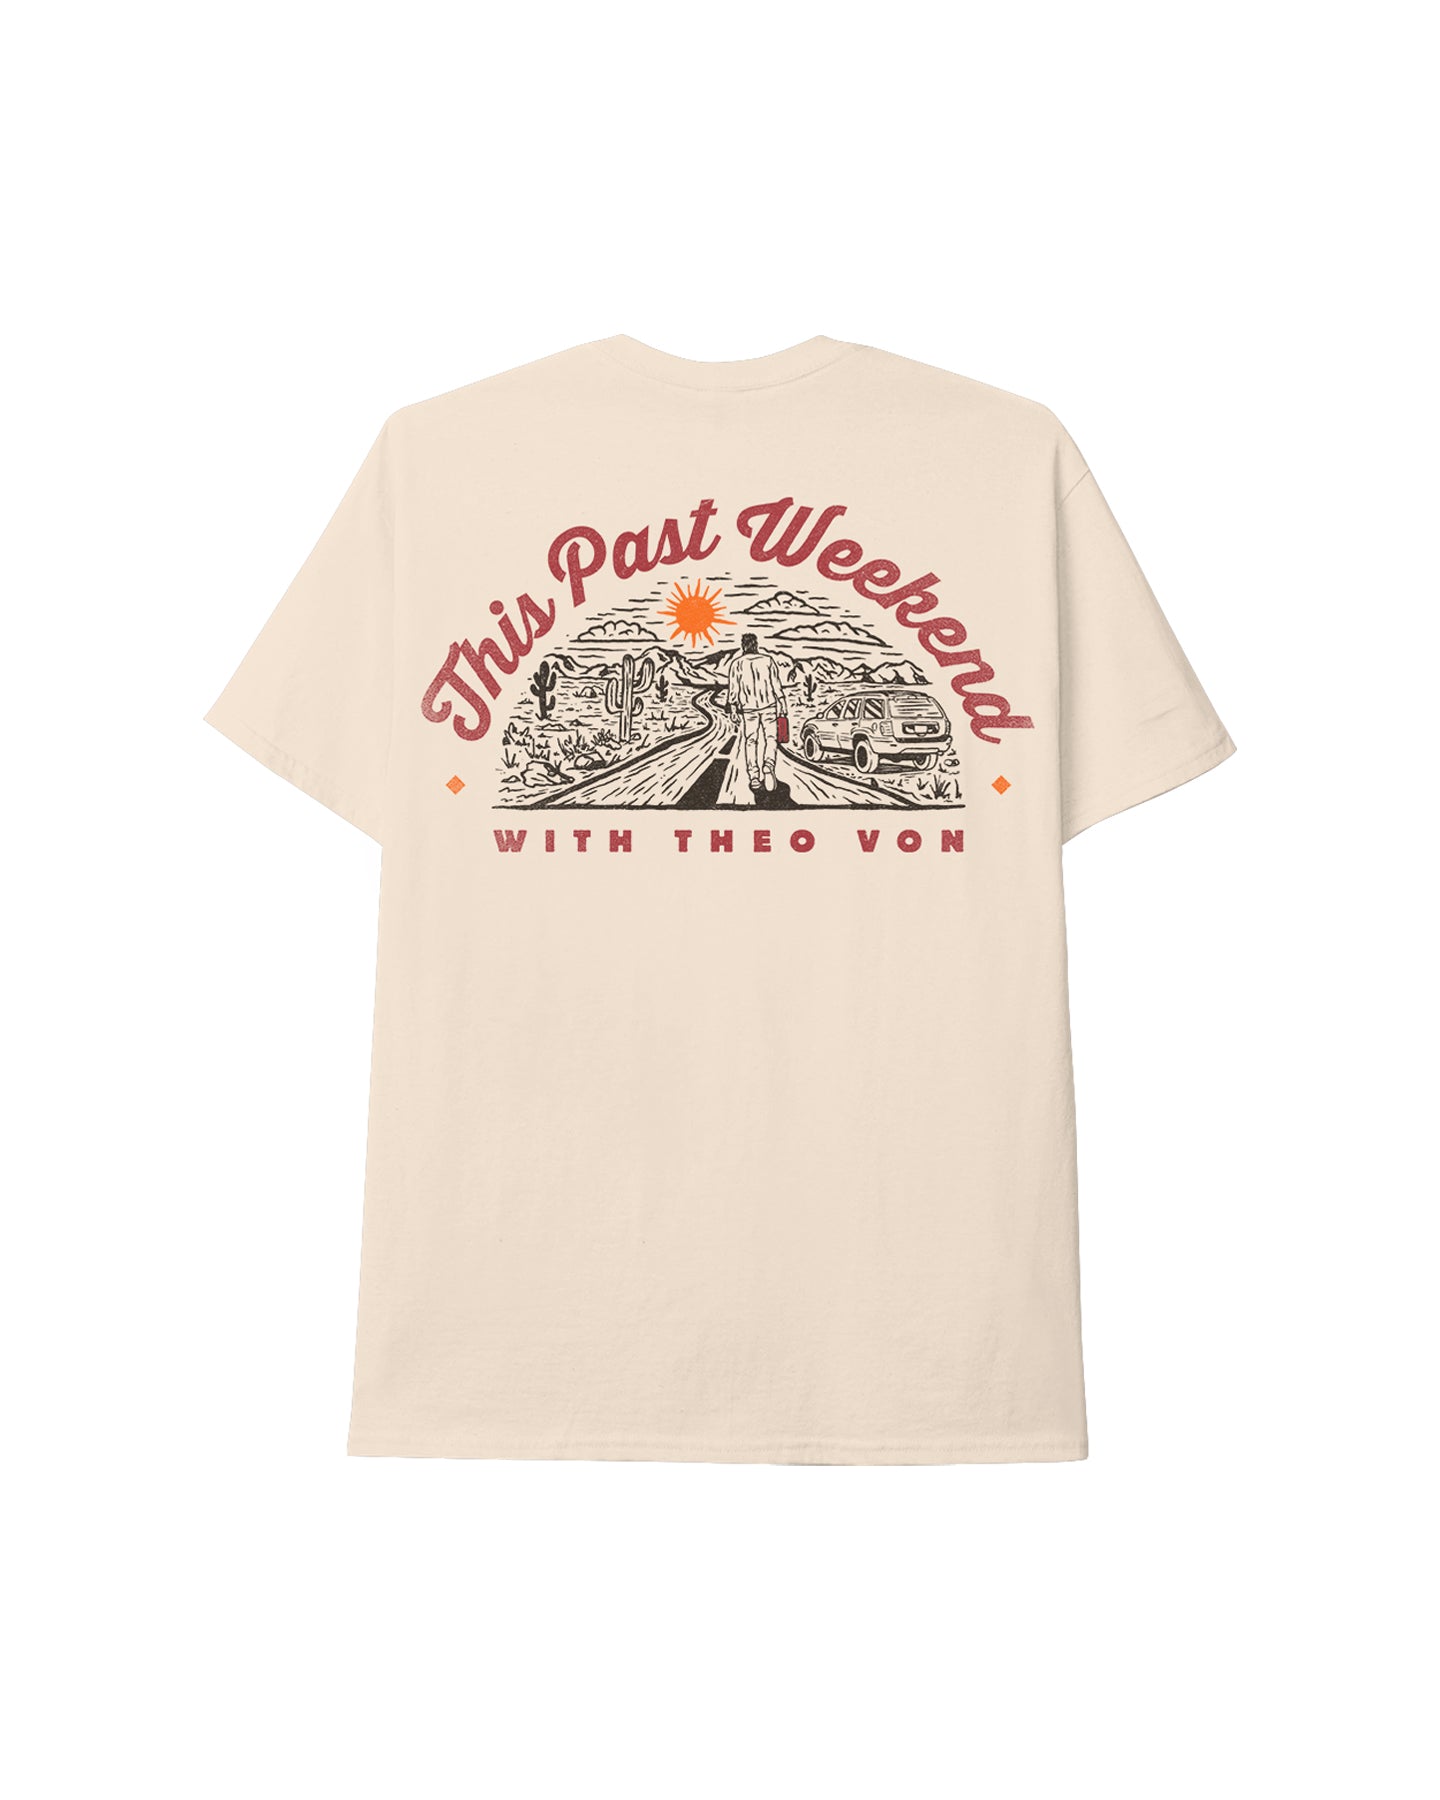 Out of Gas Tan Tee